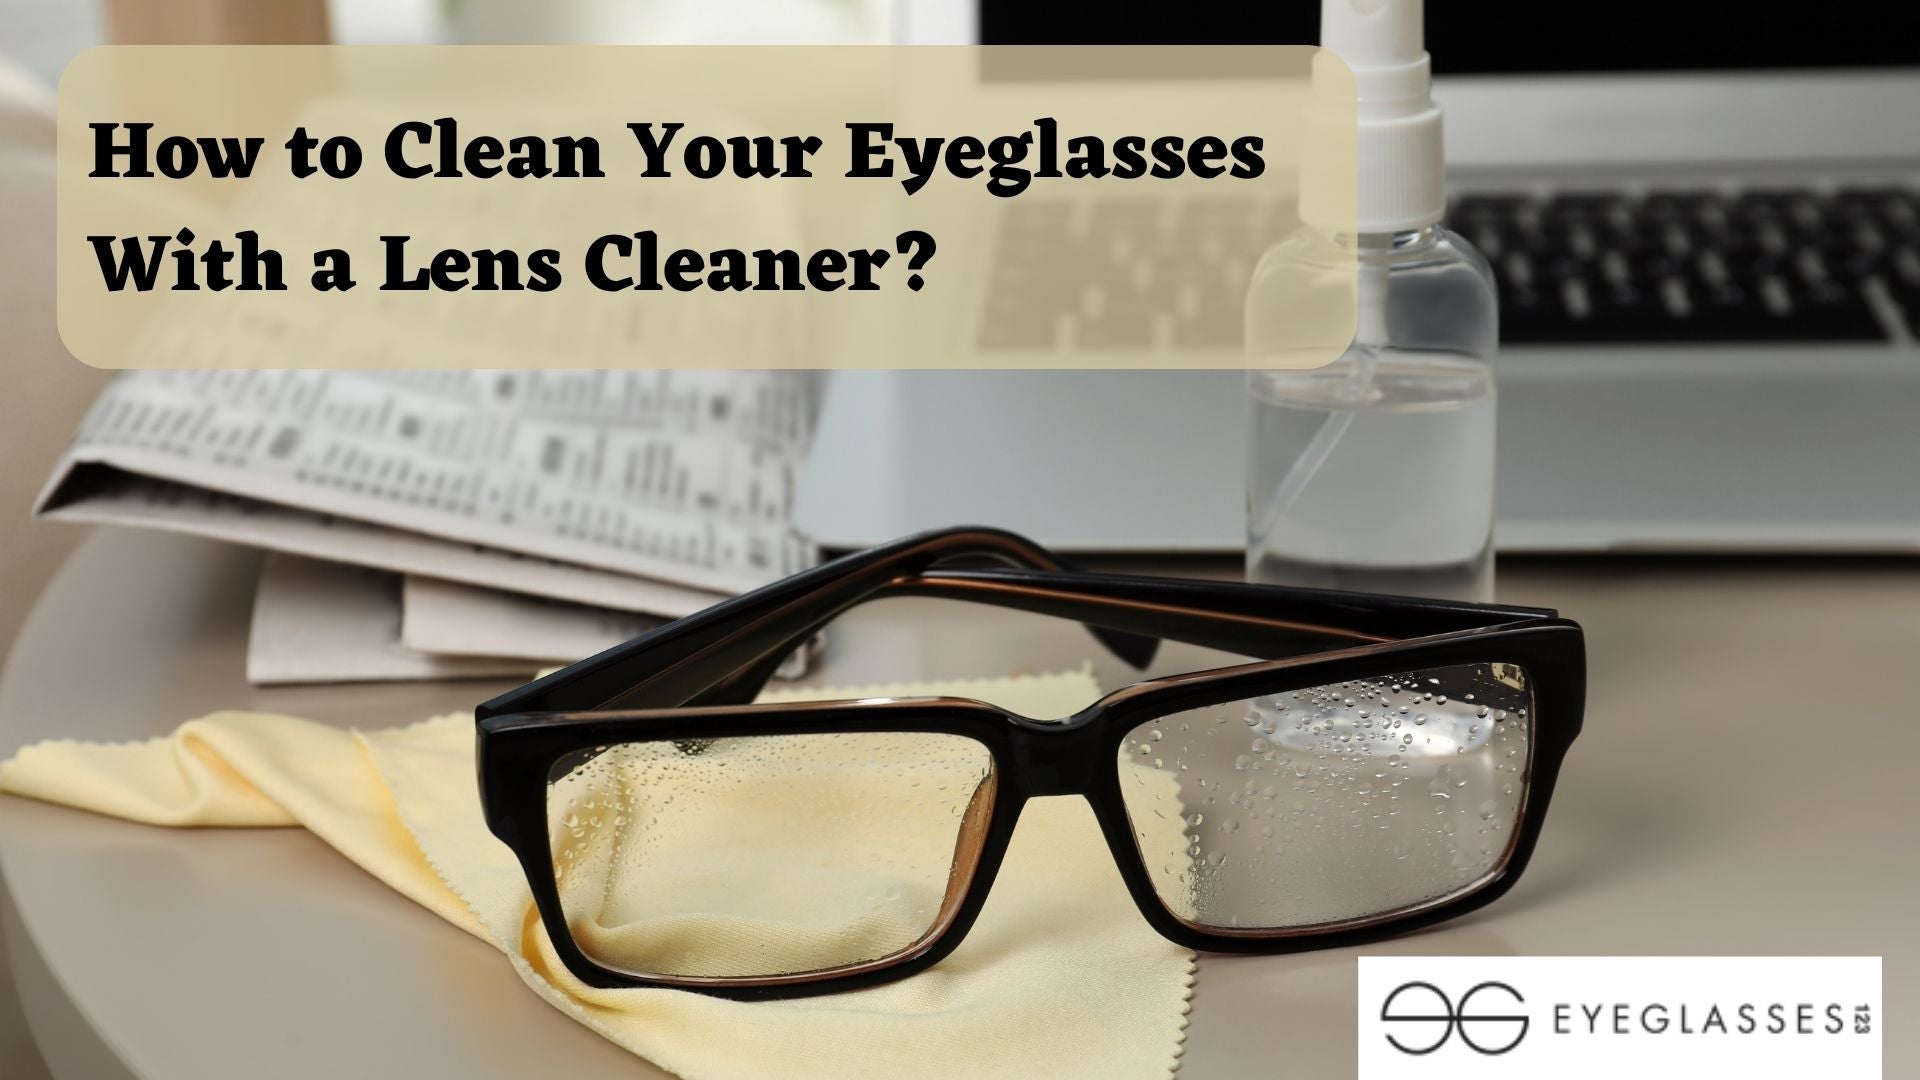 How to Clean Your Eyeglasses With a Lens Cleaner?